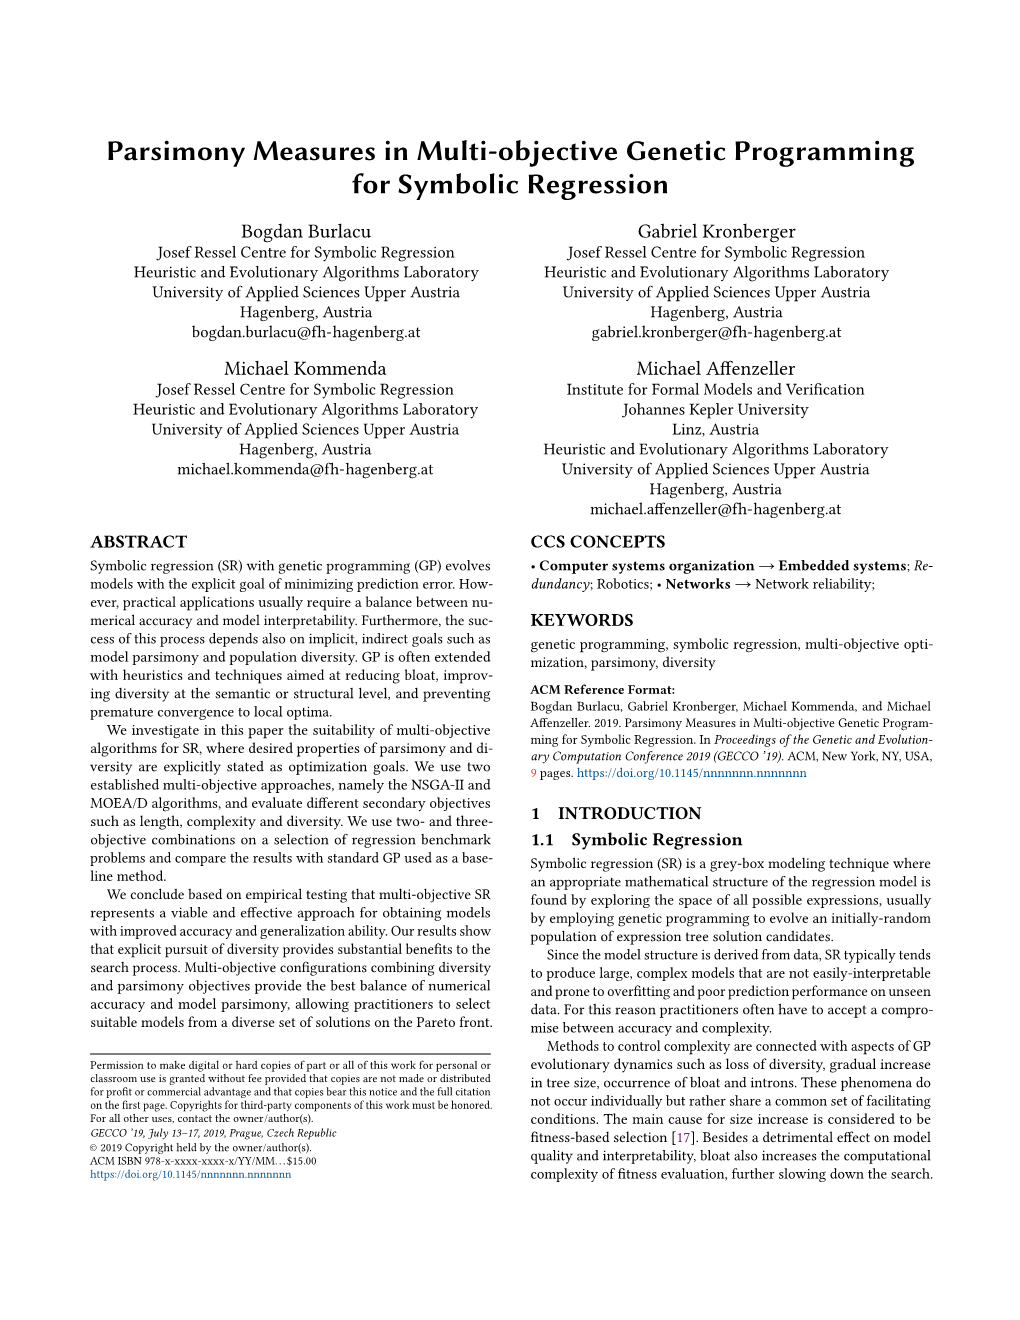 Parsimony Measures in Multi-Objective Genetic Programming for Symbolic Regression